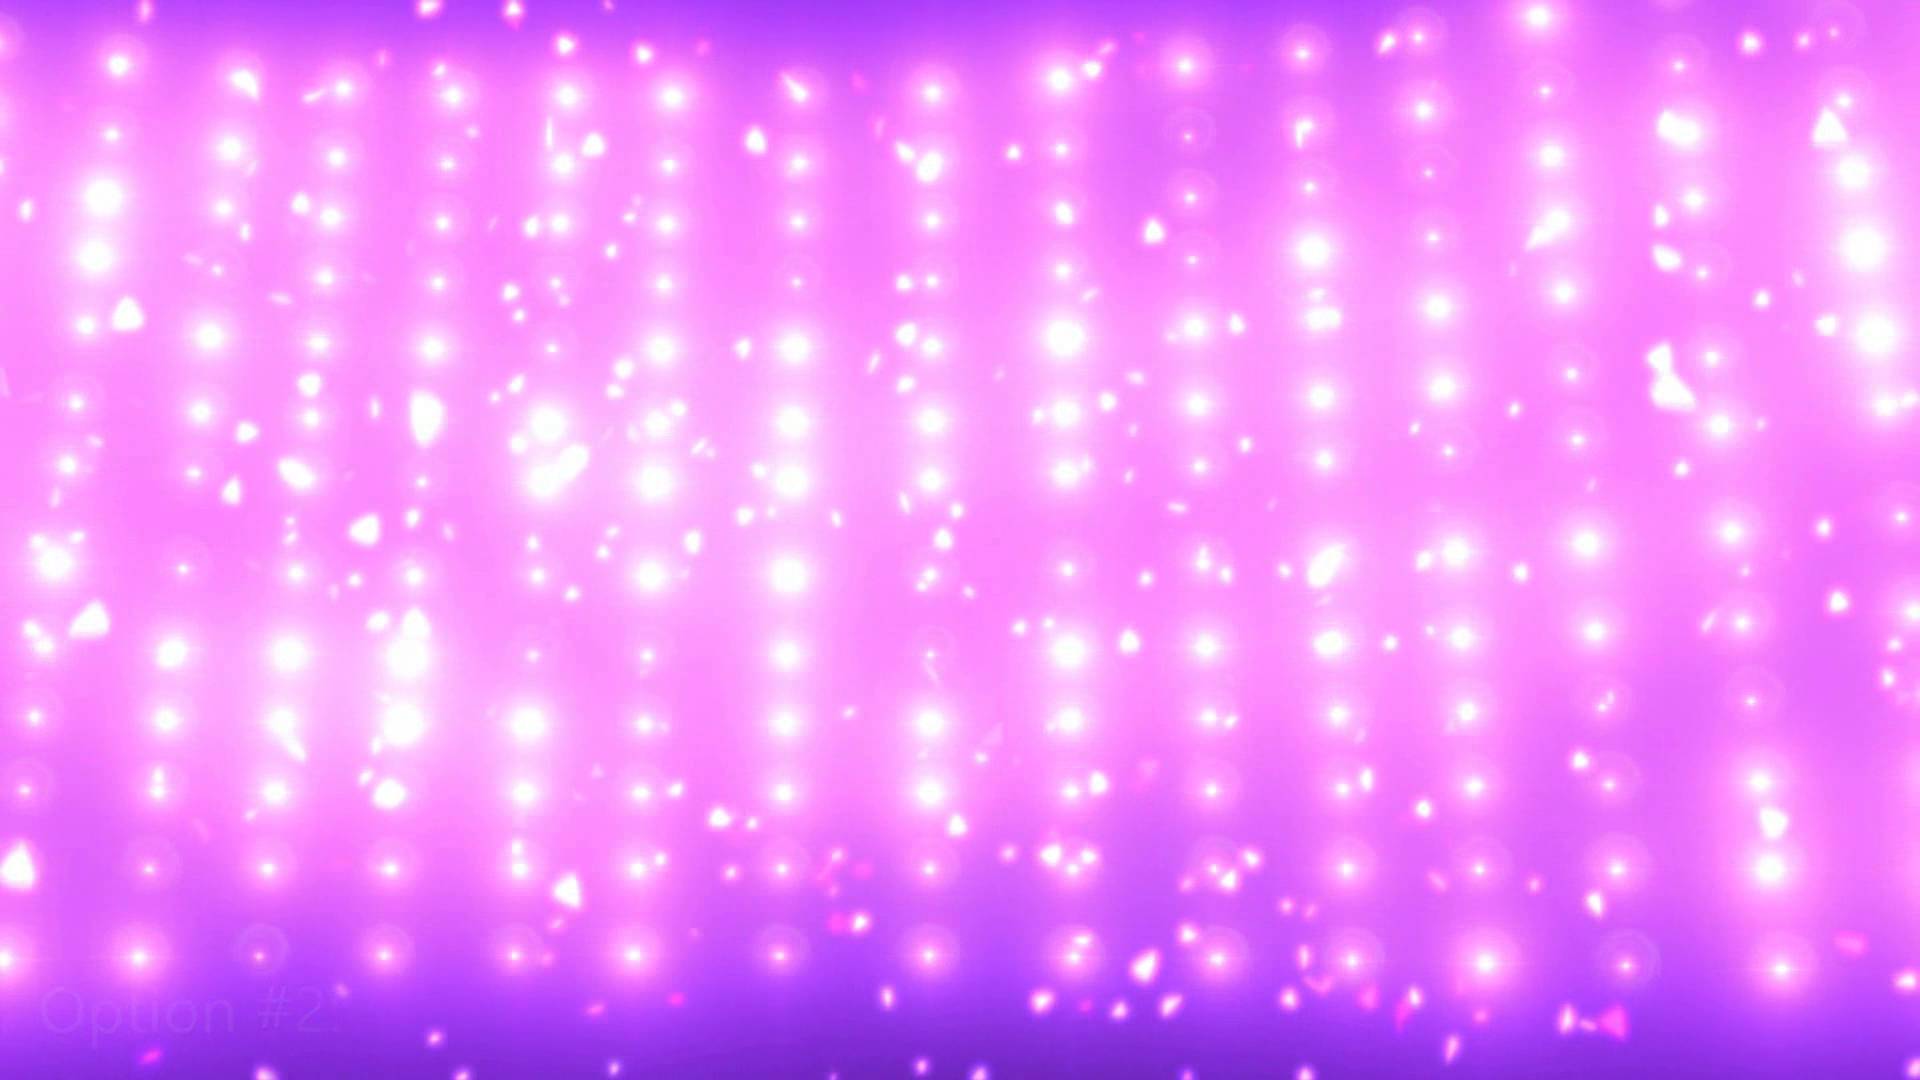 Broadway Light Show Background Pink / Purple Motion Graphic Free